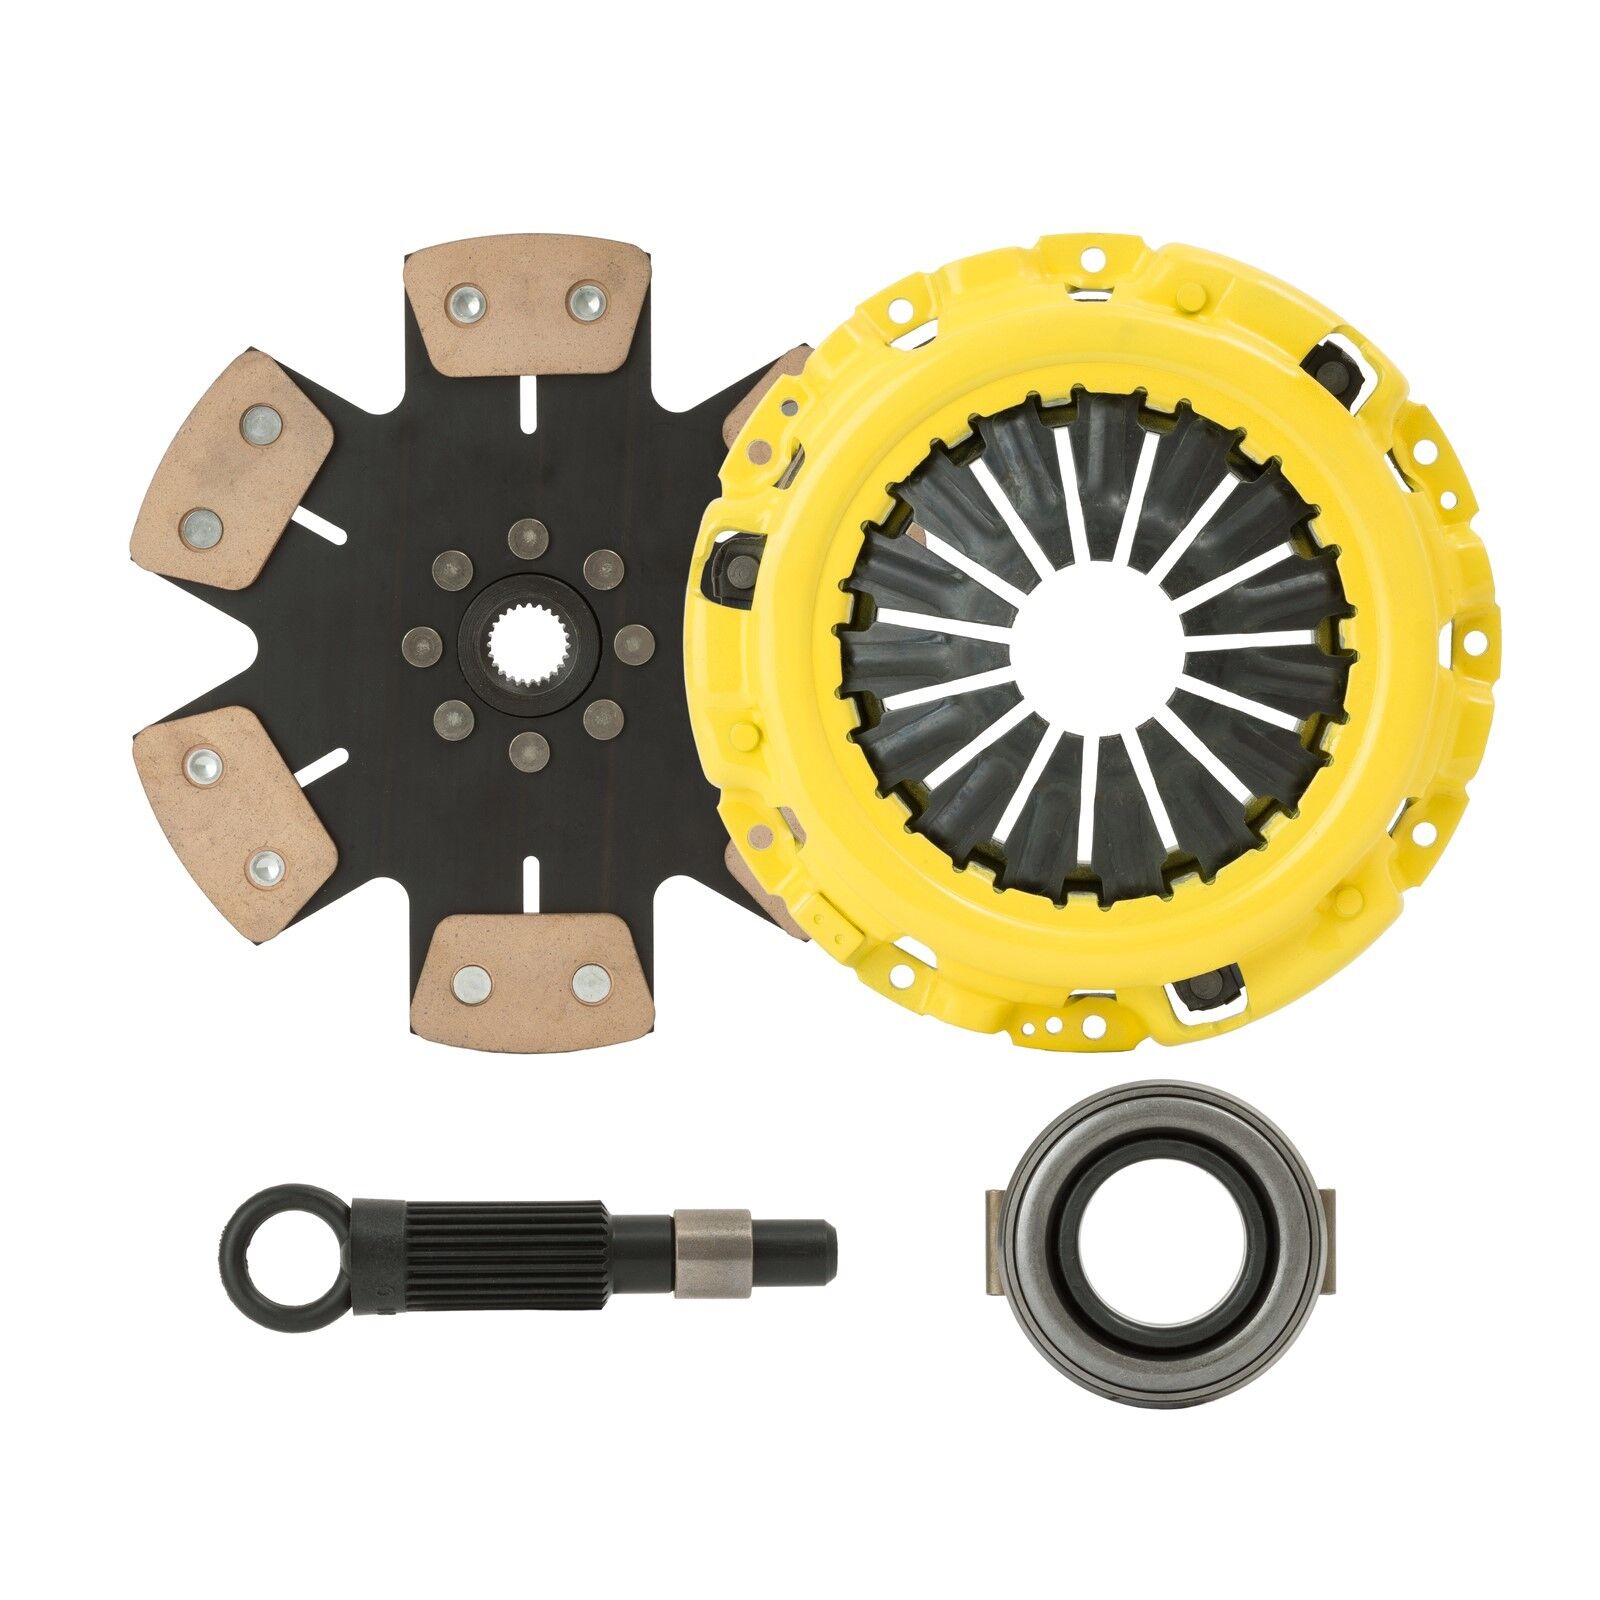 STAGE 4 XTREME RACING CLUTCH KIT fits 1994-2001 ACURA INTEGRA by CLUTCHXPERTS